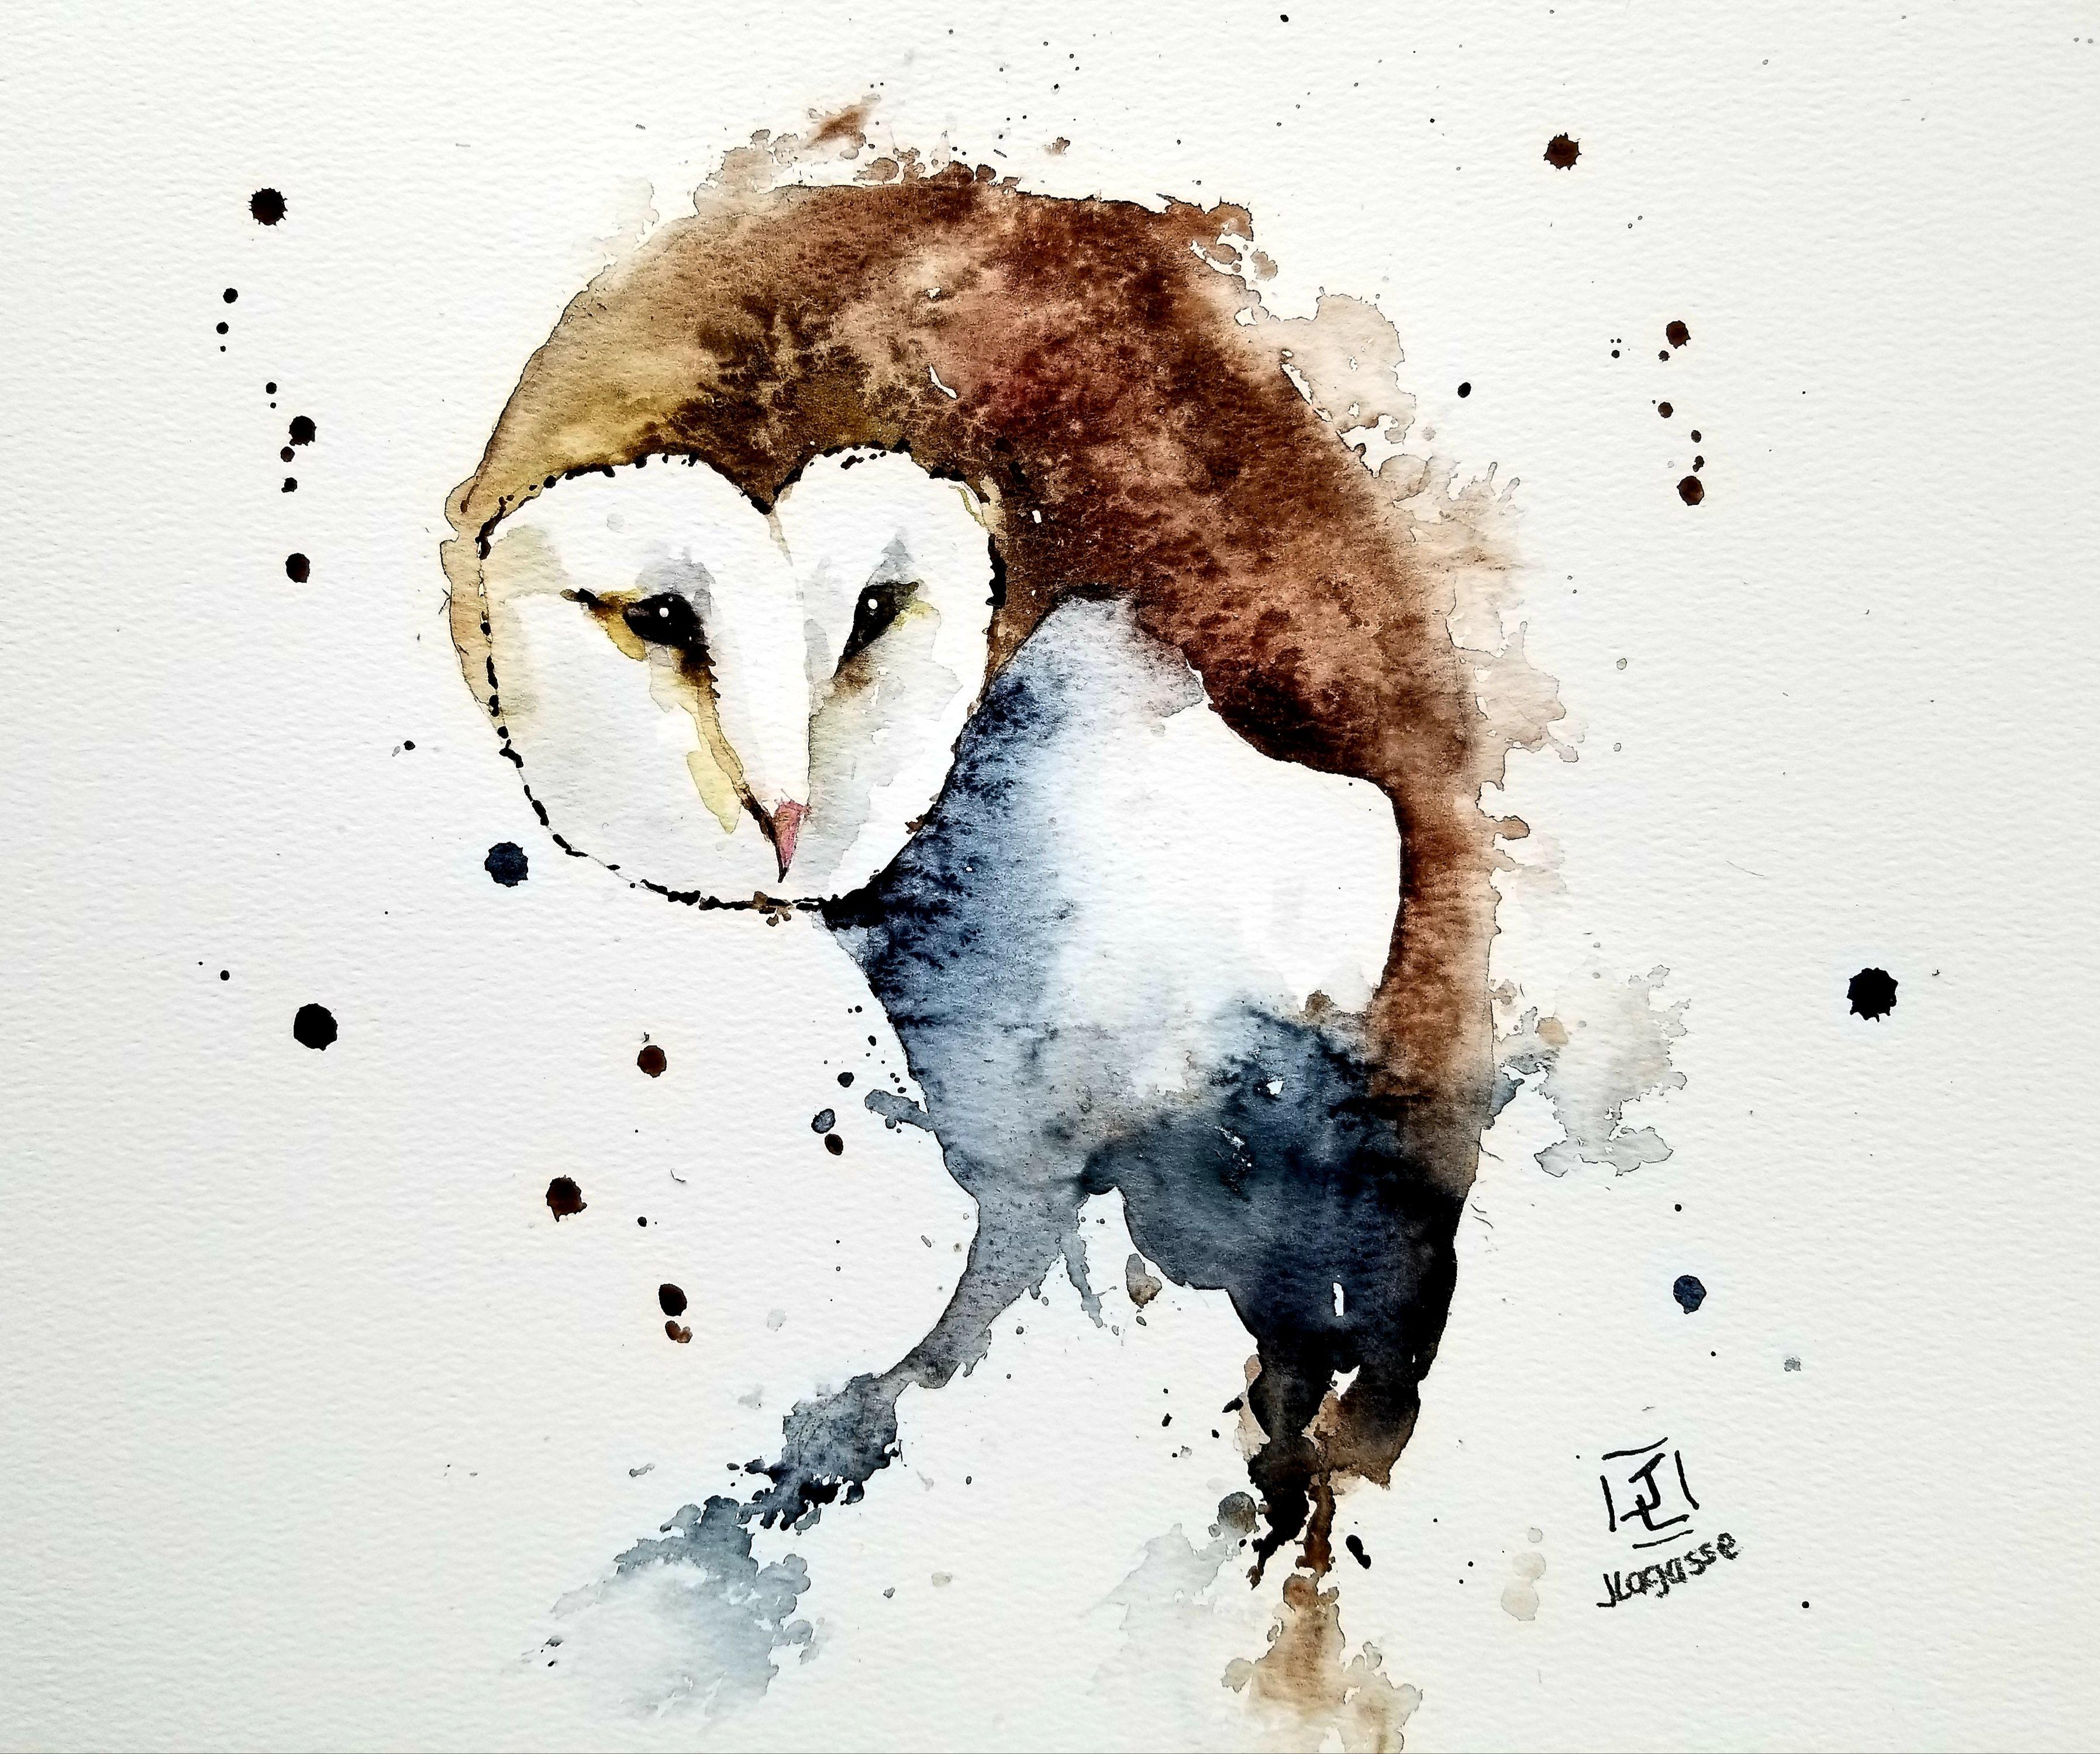 Barn Owl, Painting, Watercolor on Watercolor Paper - Art by Jim Lagasse